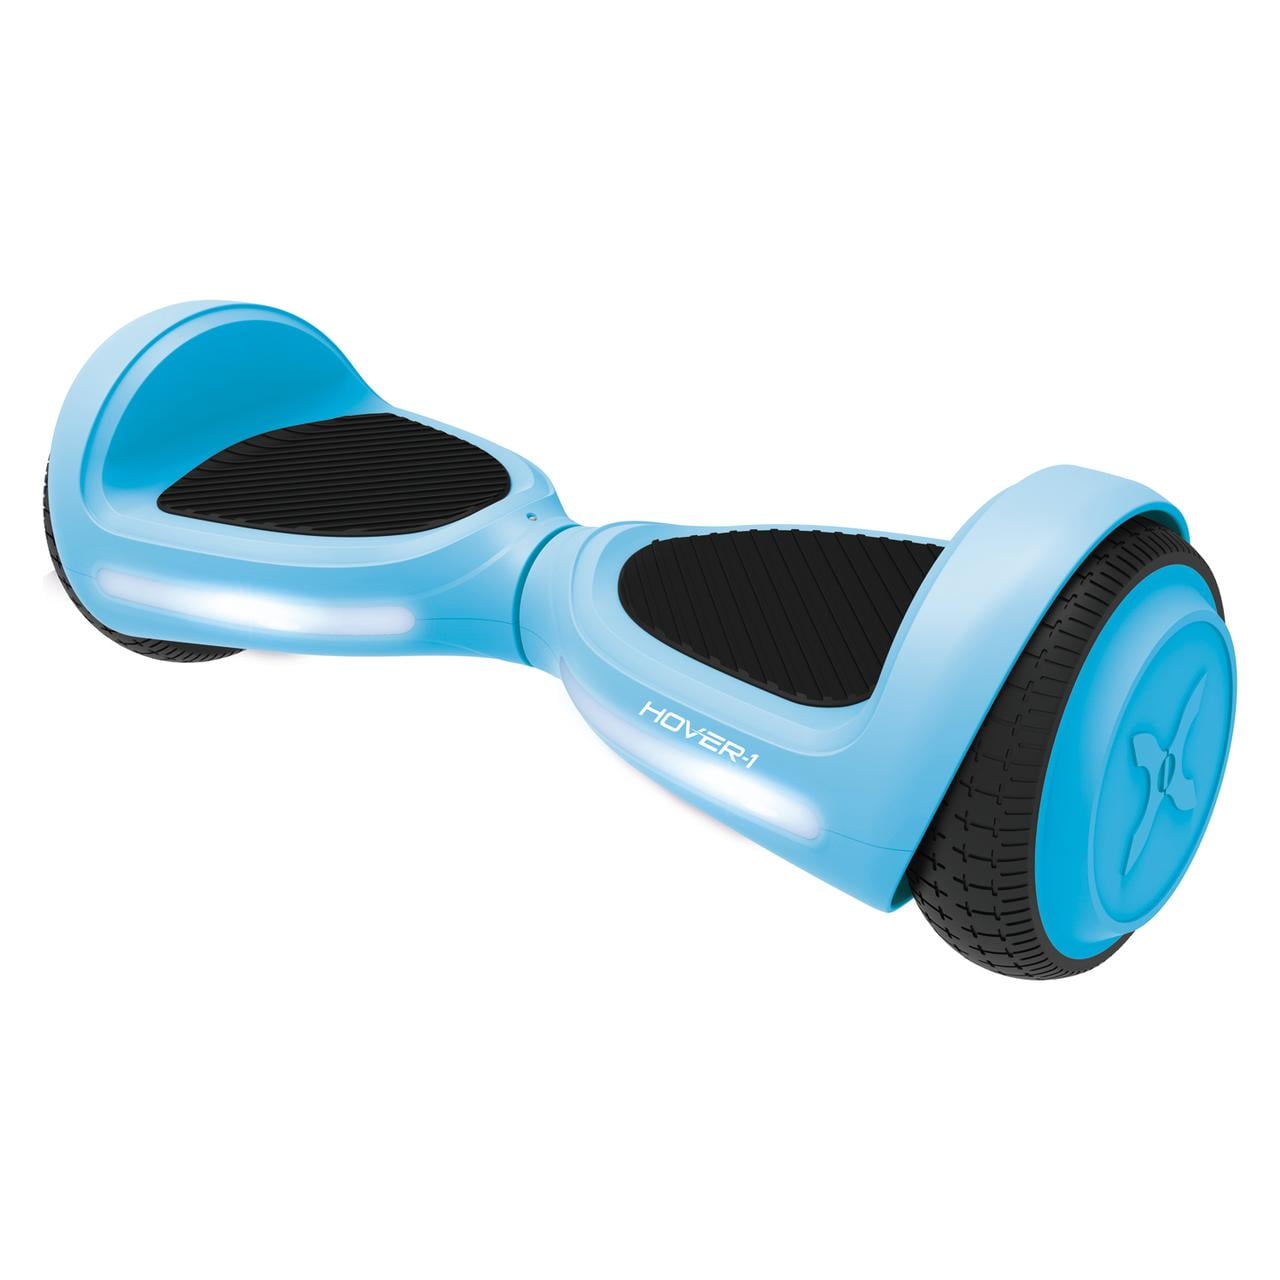 Hover-1 My First Hoverboard Kids Hoverboard w/ LED Headlights, 5 MPH Max Speed, 80 lbs Max Weight, 3 Miles Max Distance - Blue